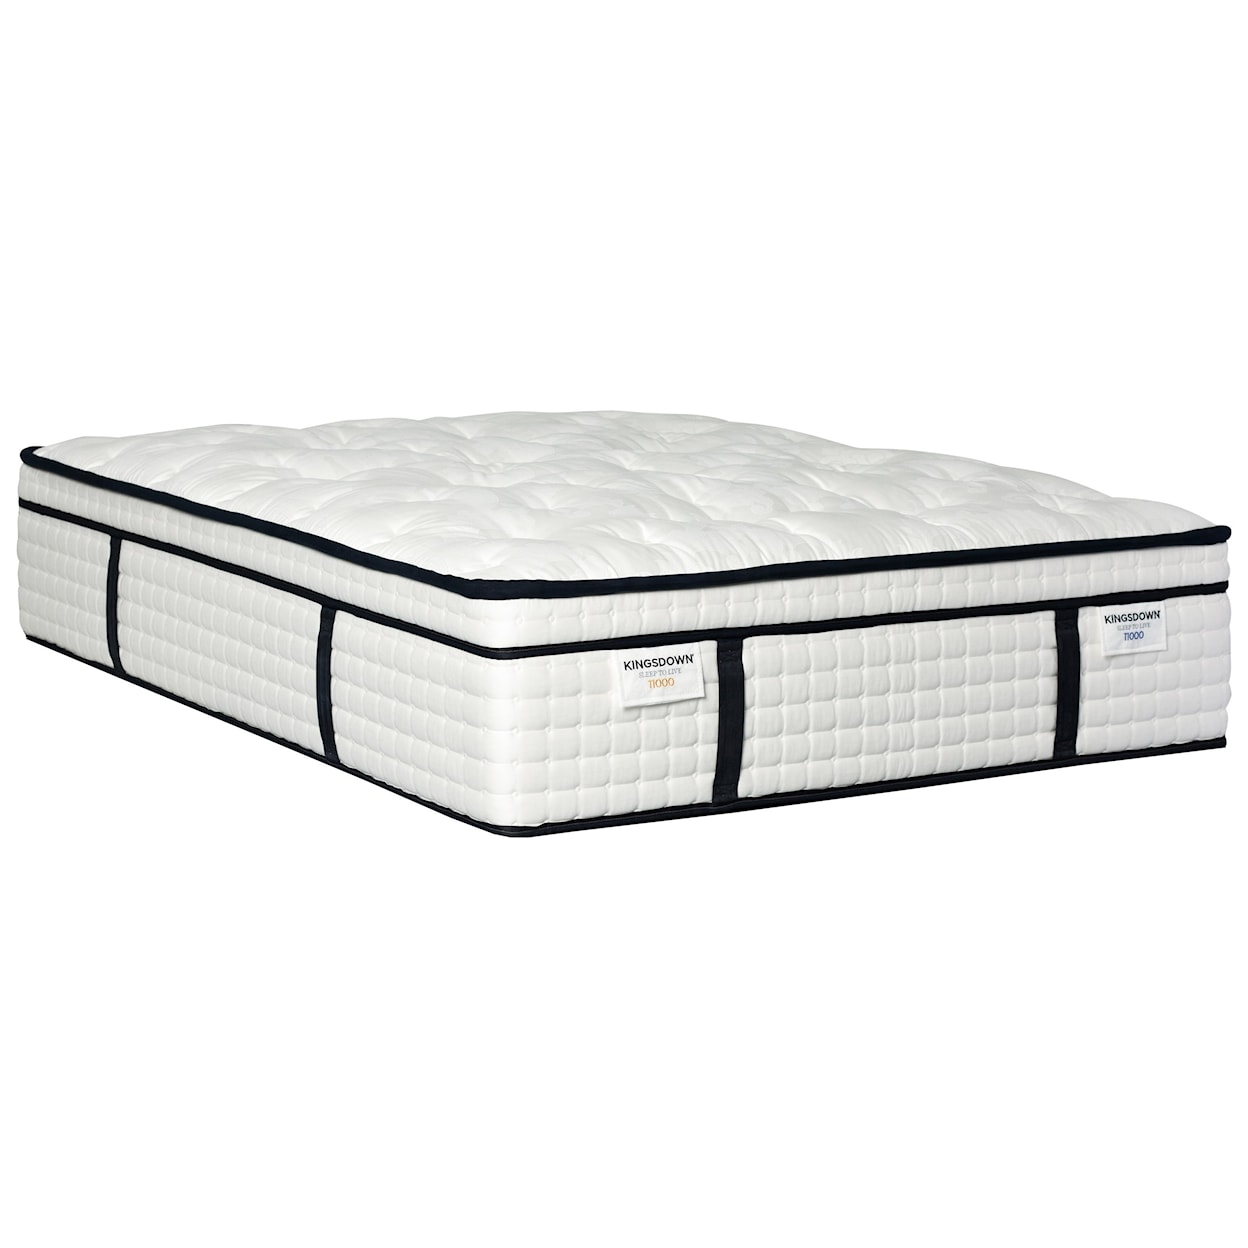 Kingsdown Sleep to Live 11000 Gold Blue ET Twin Pocketed Coil Mattress